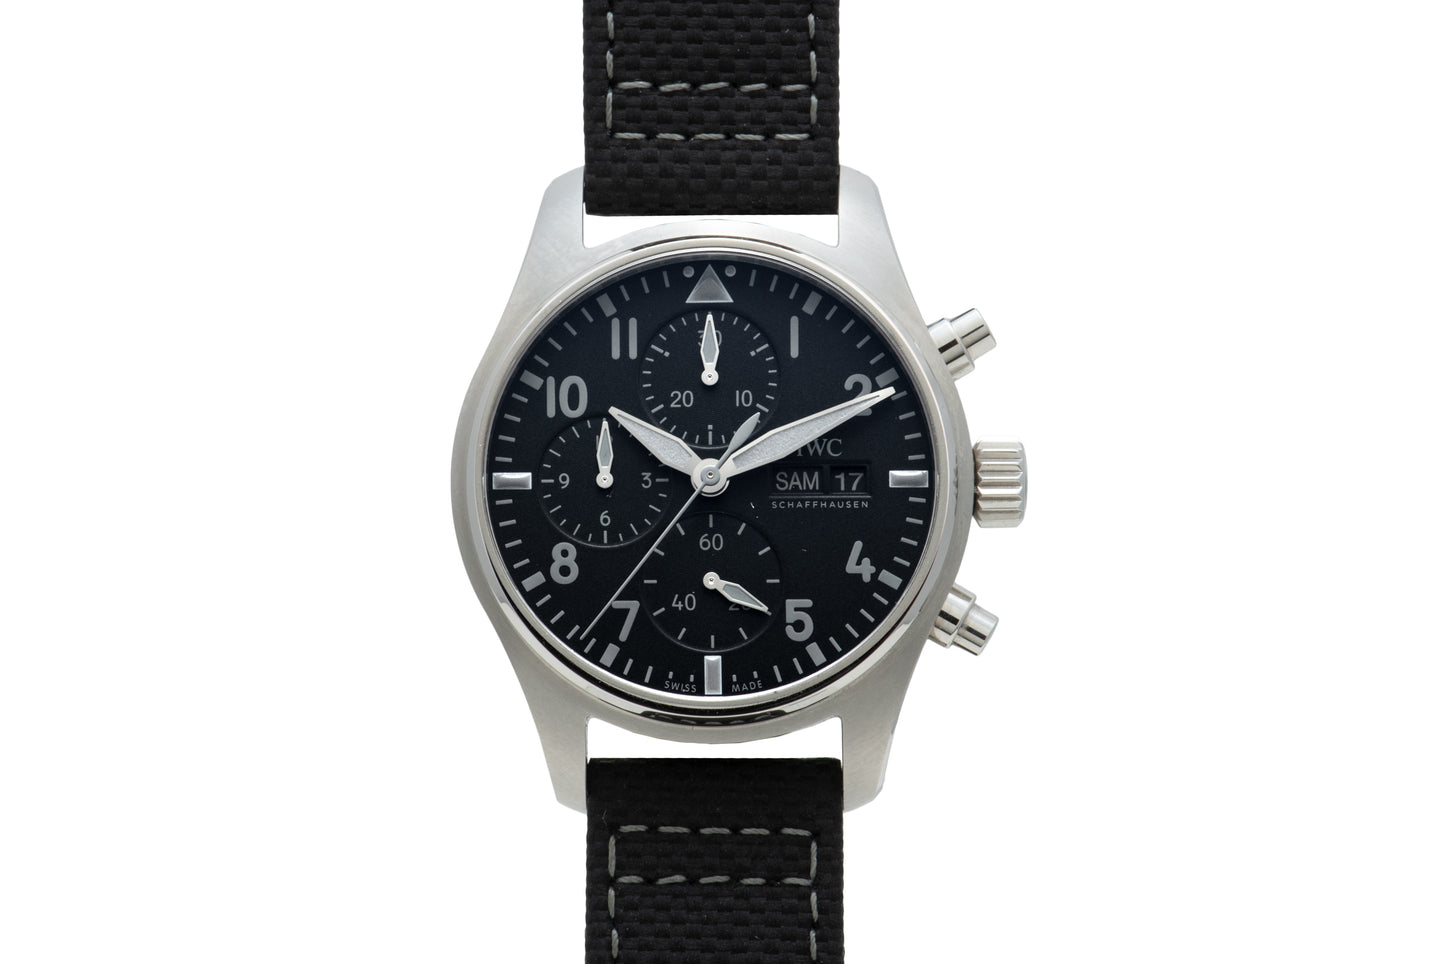 IWC X Collective Horology Pilot's Watch Chronograph C.03